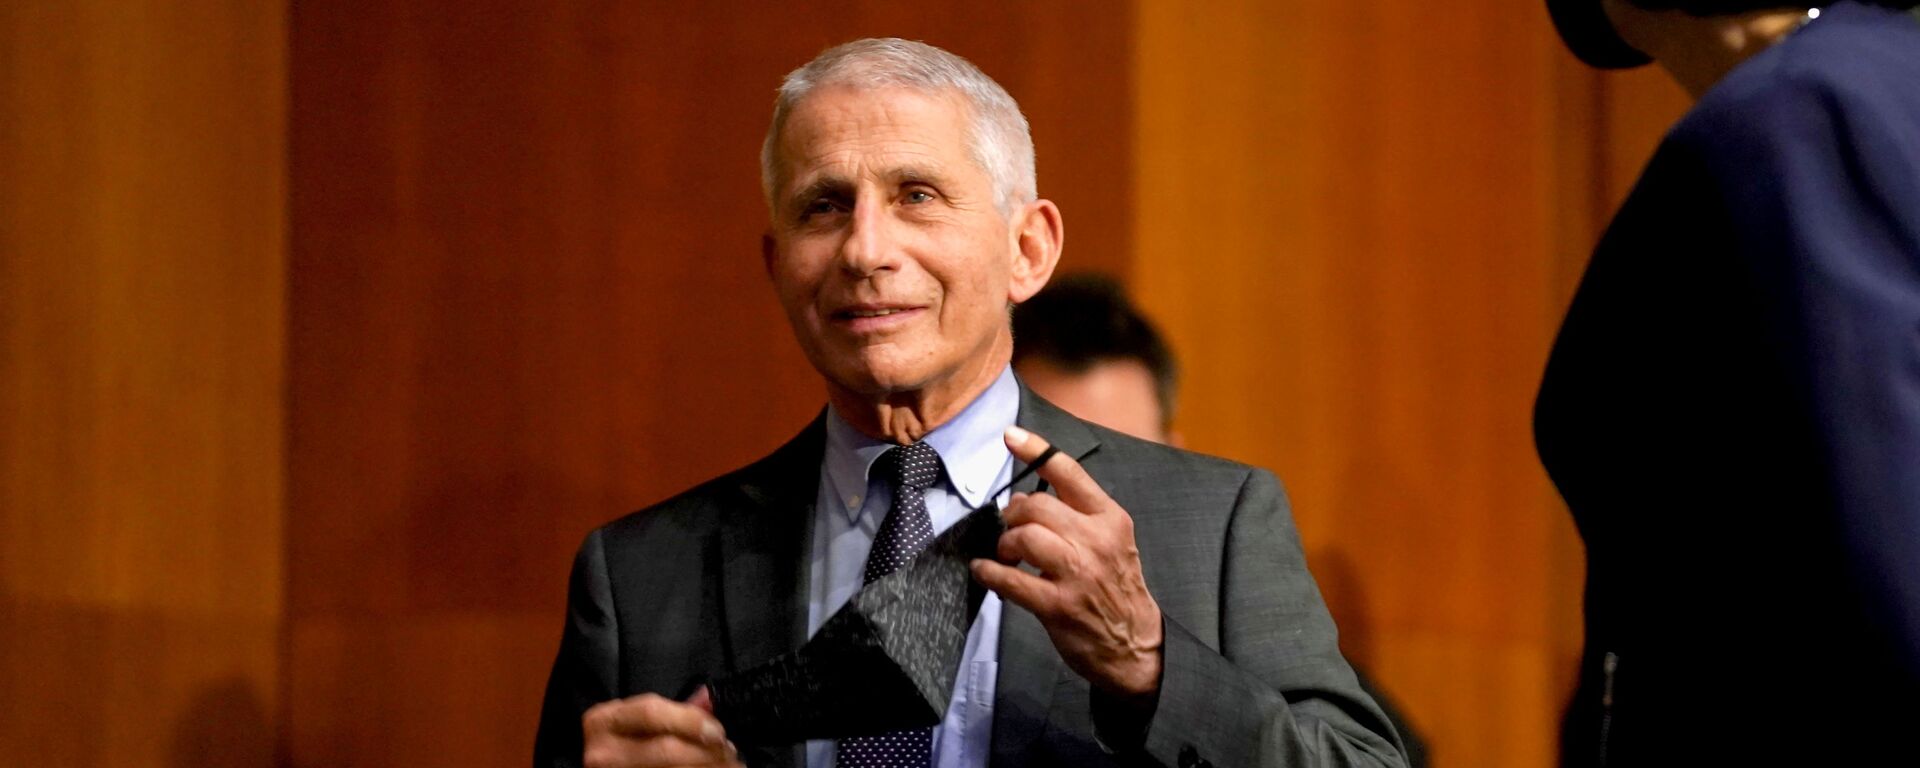 Dr. Anthony Fauci, director of the National Institute of Allergy and Infectious Diseases, arrives for a Senate Health, Education, Labor and Pensions Committee hearing to discuss the on-going federal response to COVID-19, at the U.S. Capitol in Washington, D.C., U.S., May 11, 2021 - Sputnik International, 1920, 05.06.2021